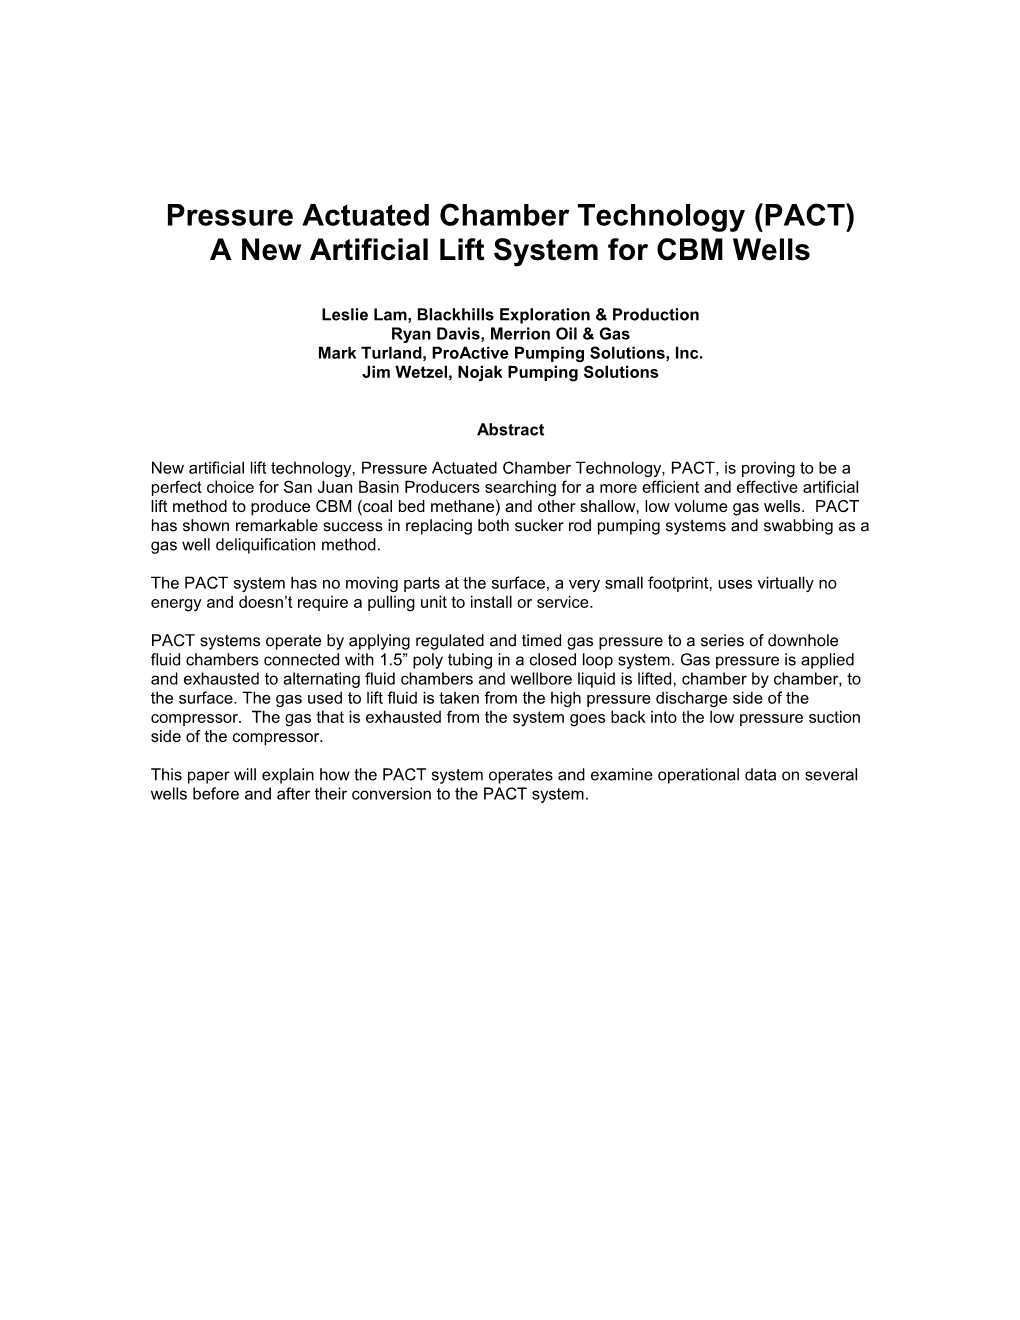 Pressure Actuated Chamber Technology (PACT)